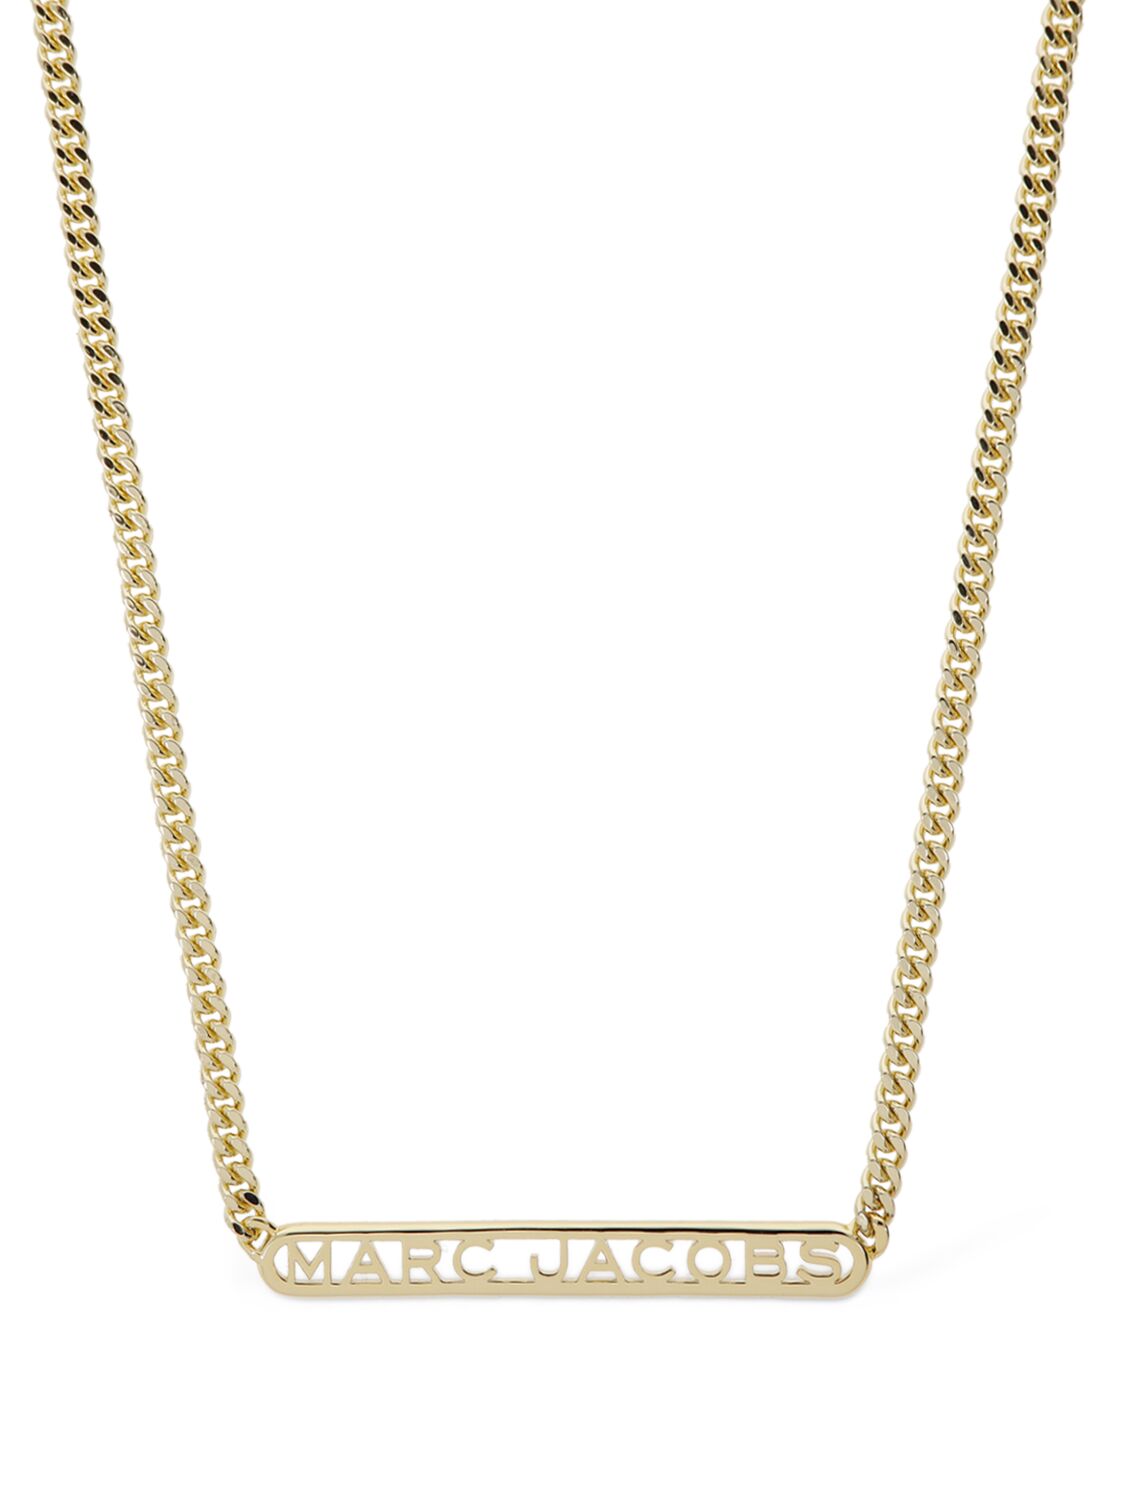 Marc Jacobs Monogram Chain Necklace In Gold